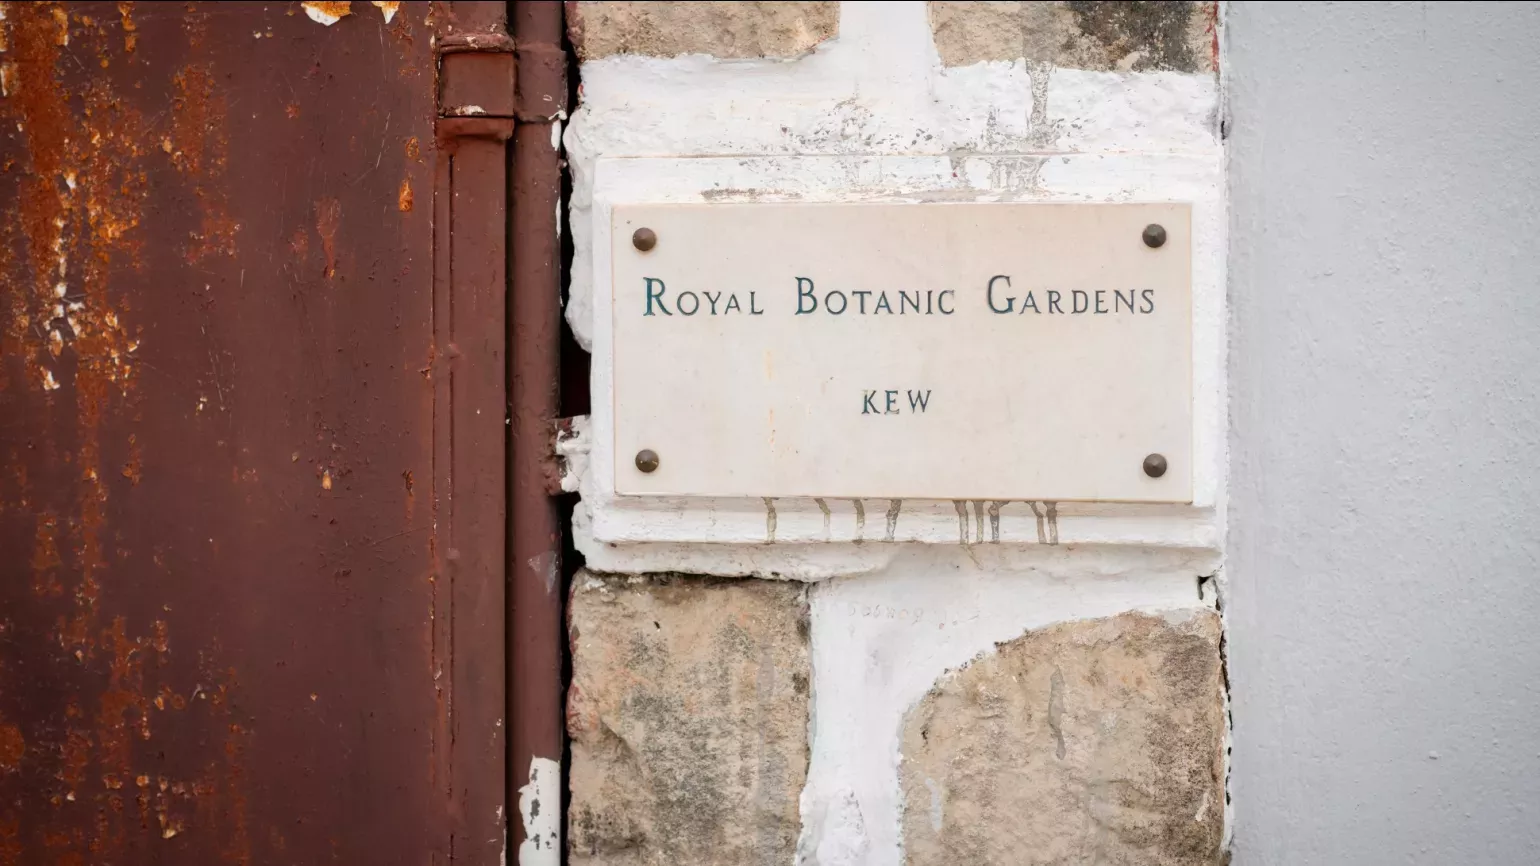 A plaque on a building that reads Royal Botanic Gardens Kew